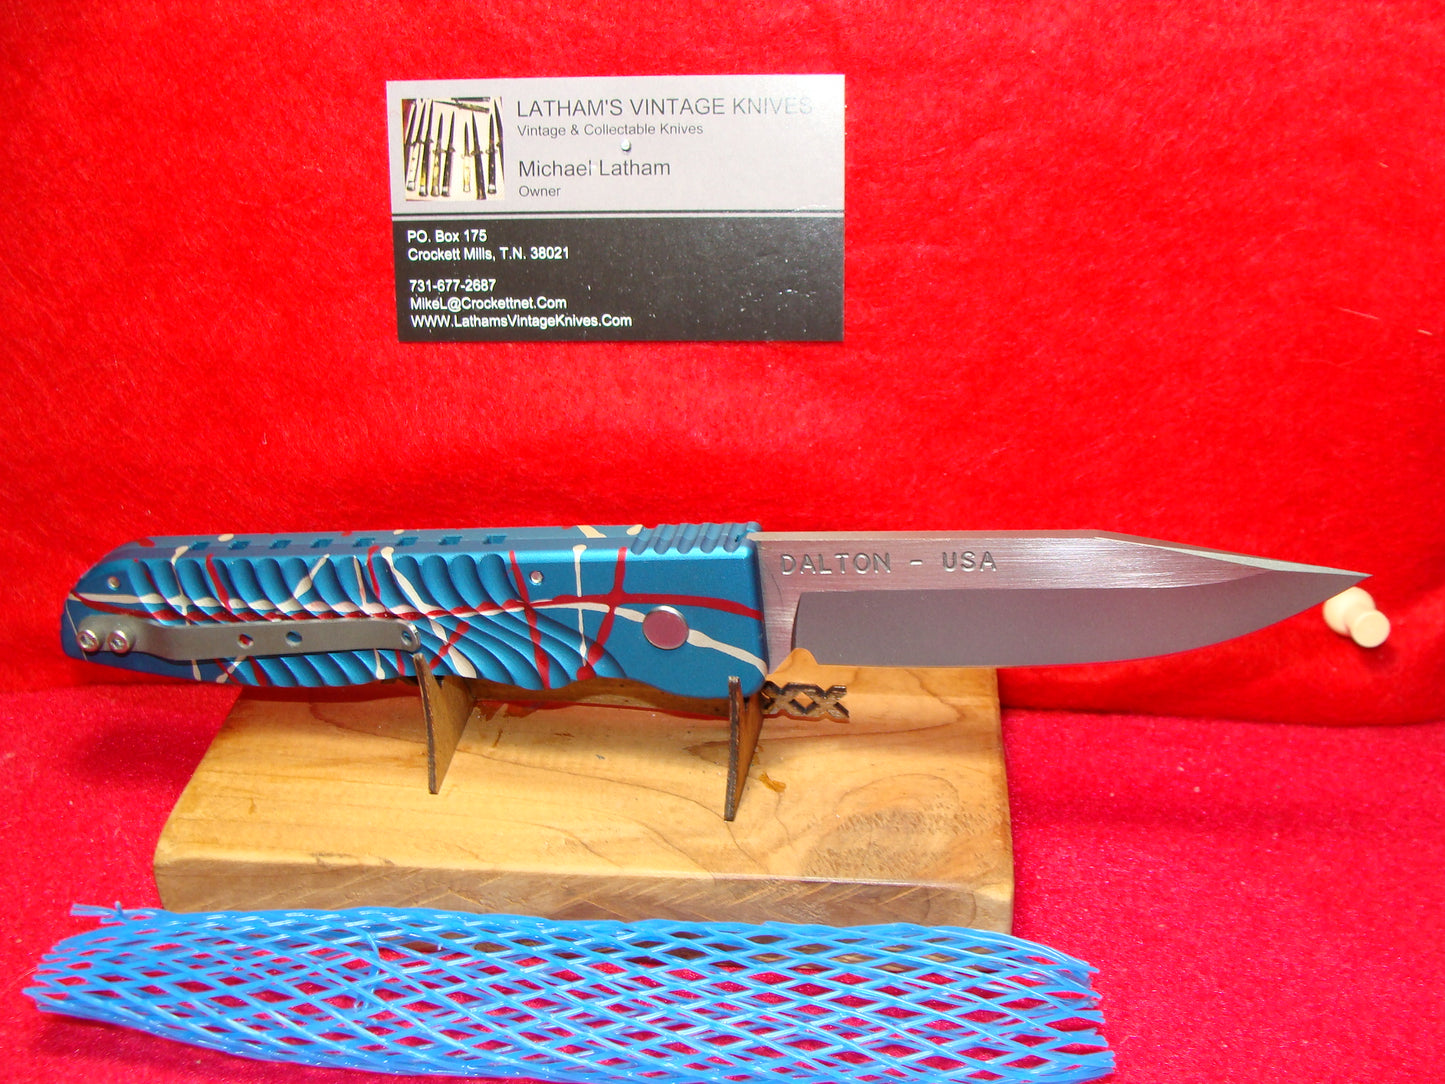 DALTON, ROB D.C.C. COMBAT CUTLERY USA 1995-2010 CUSTOM AUTOMATIC FIRST TO FIGHT MINUTEMAN TACTICAL AUTOMATIC KNIFE BLUE METAL HANDLES